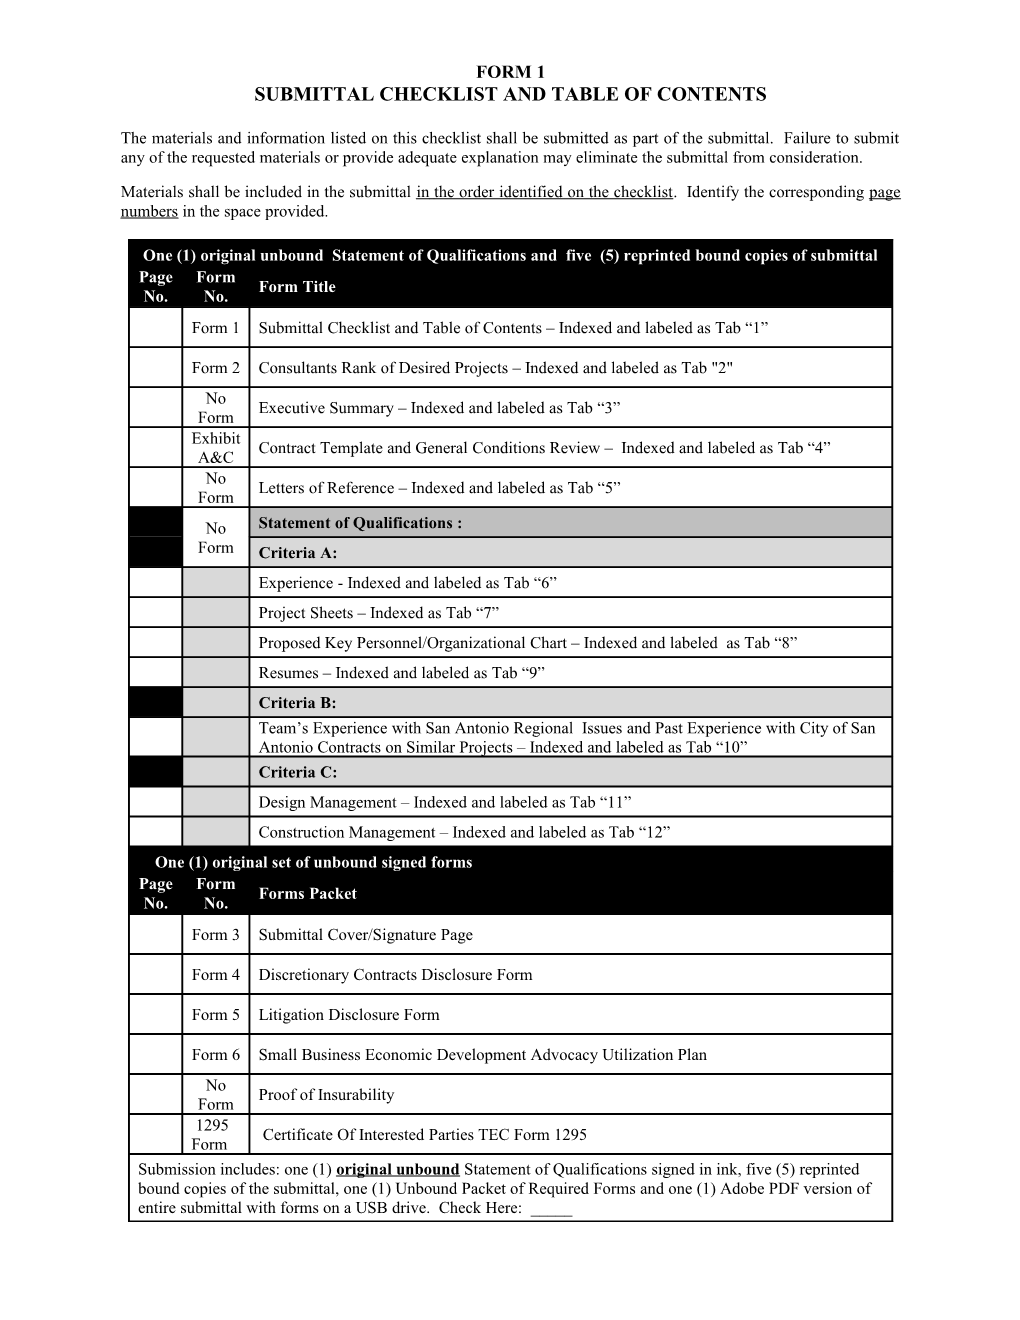 Submittal Checklist and Table of Contents